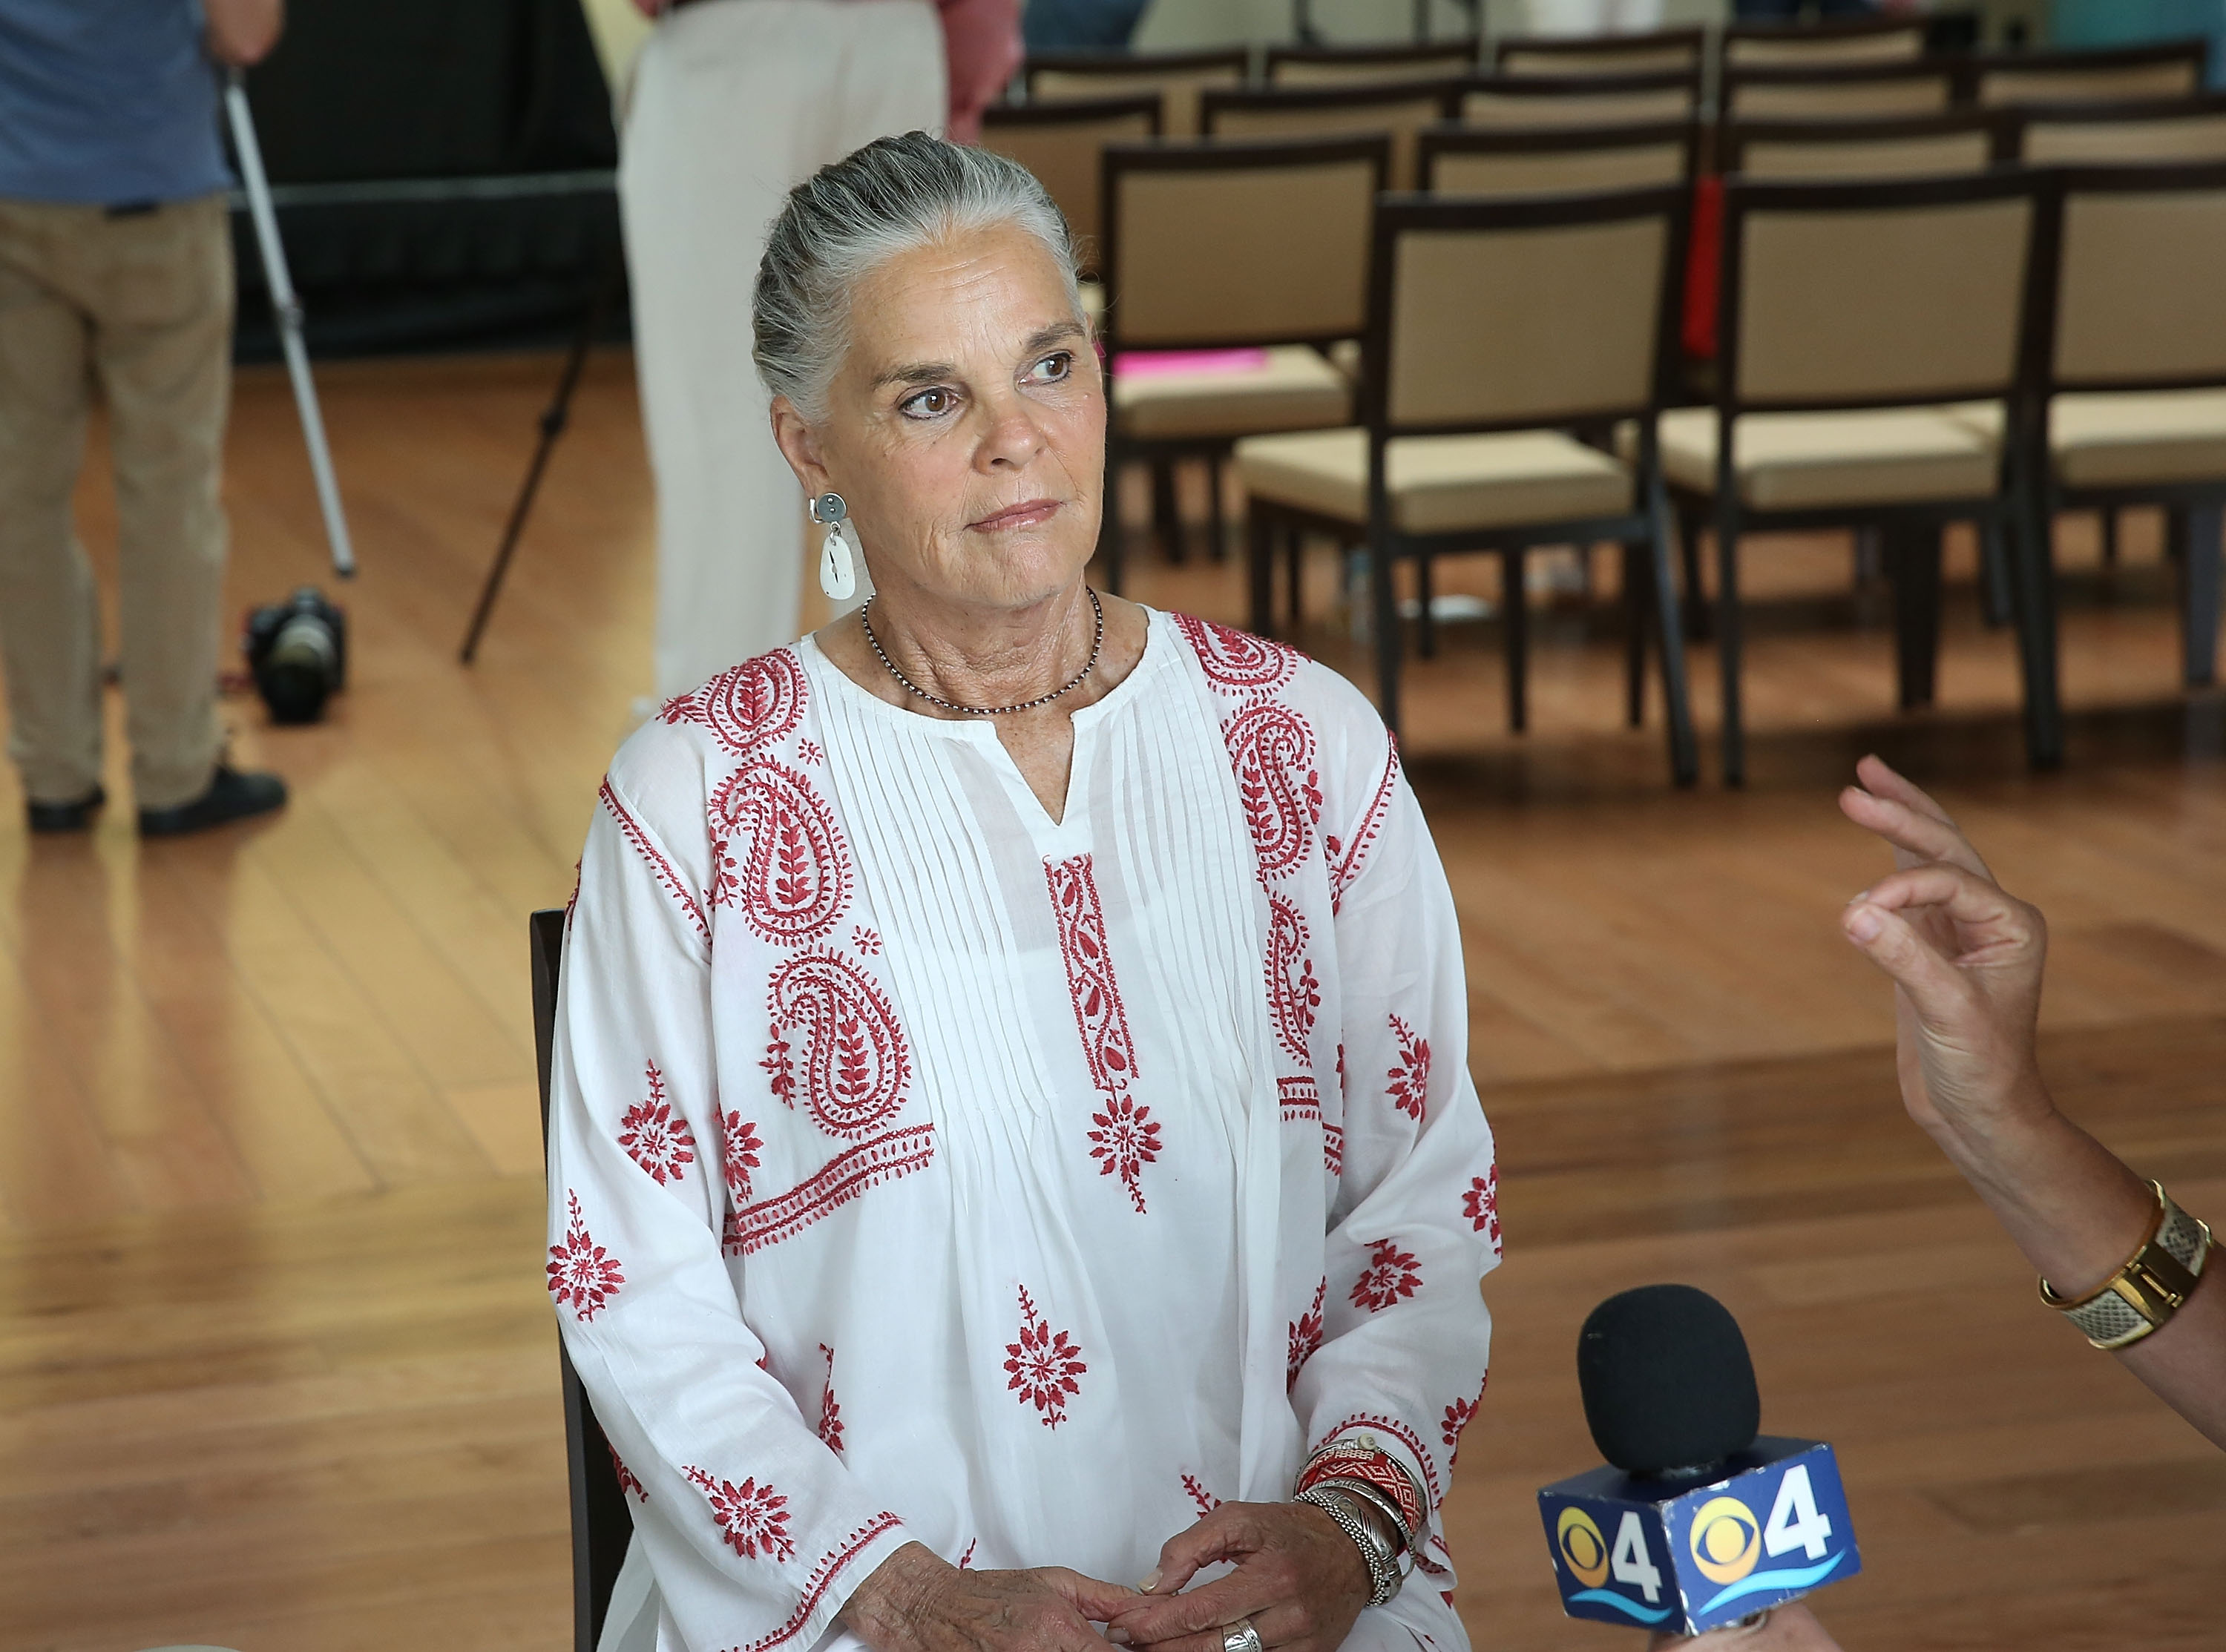 Ali MacGraw during a press conference for "Love Letters at Broward Center For The Performing Arts on July 20, 2015 in Fort Lauderdale, Florid | Source: Getty Images